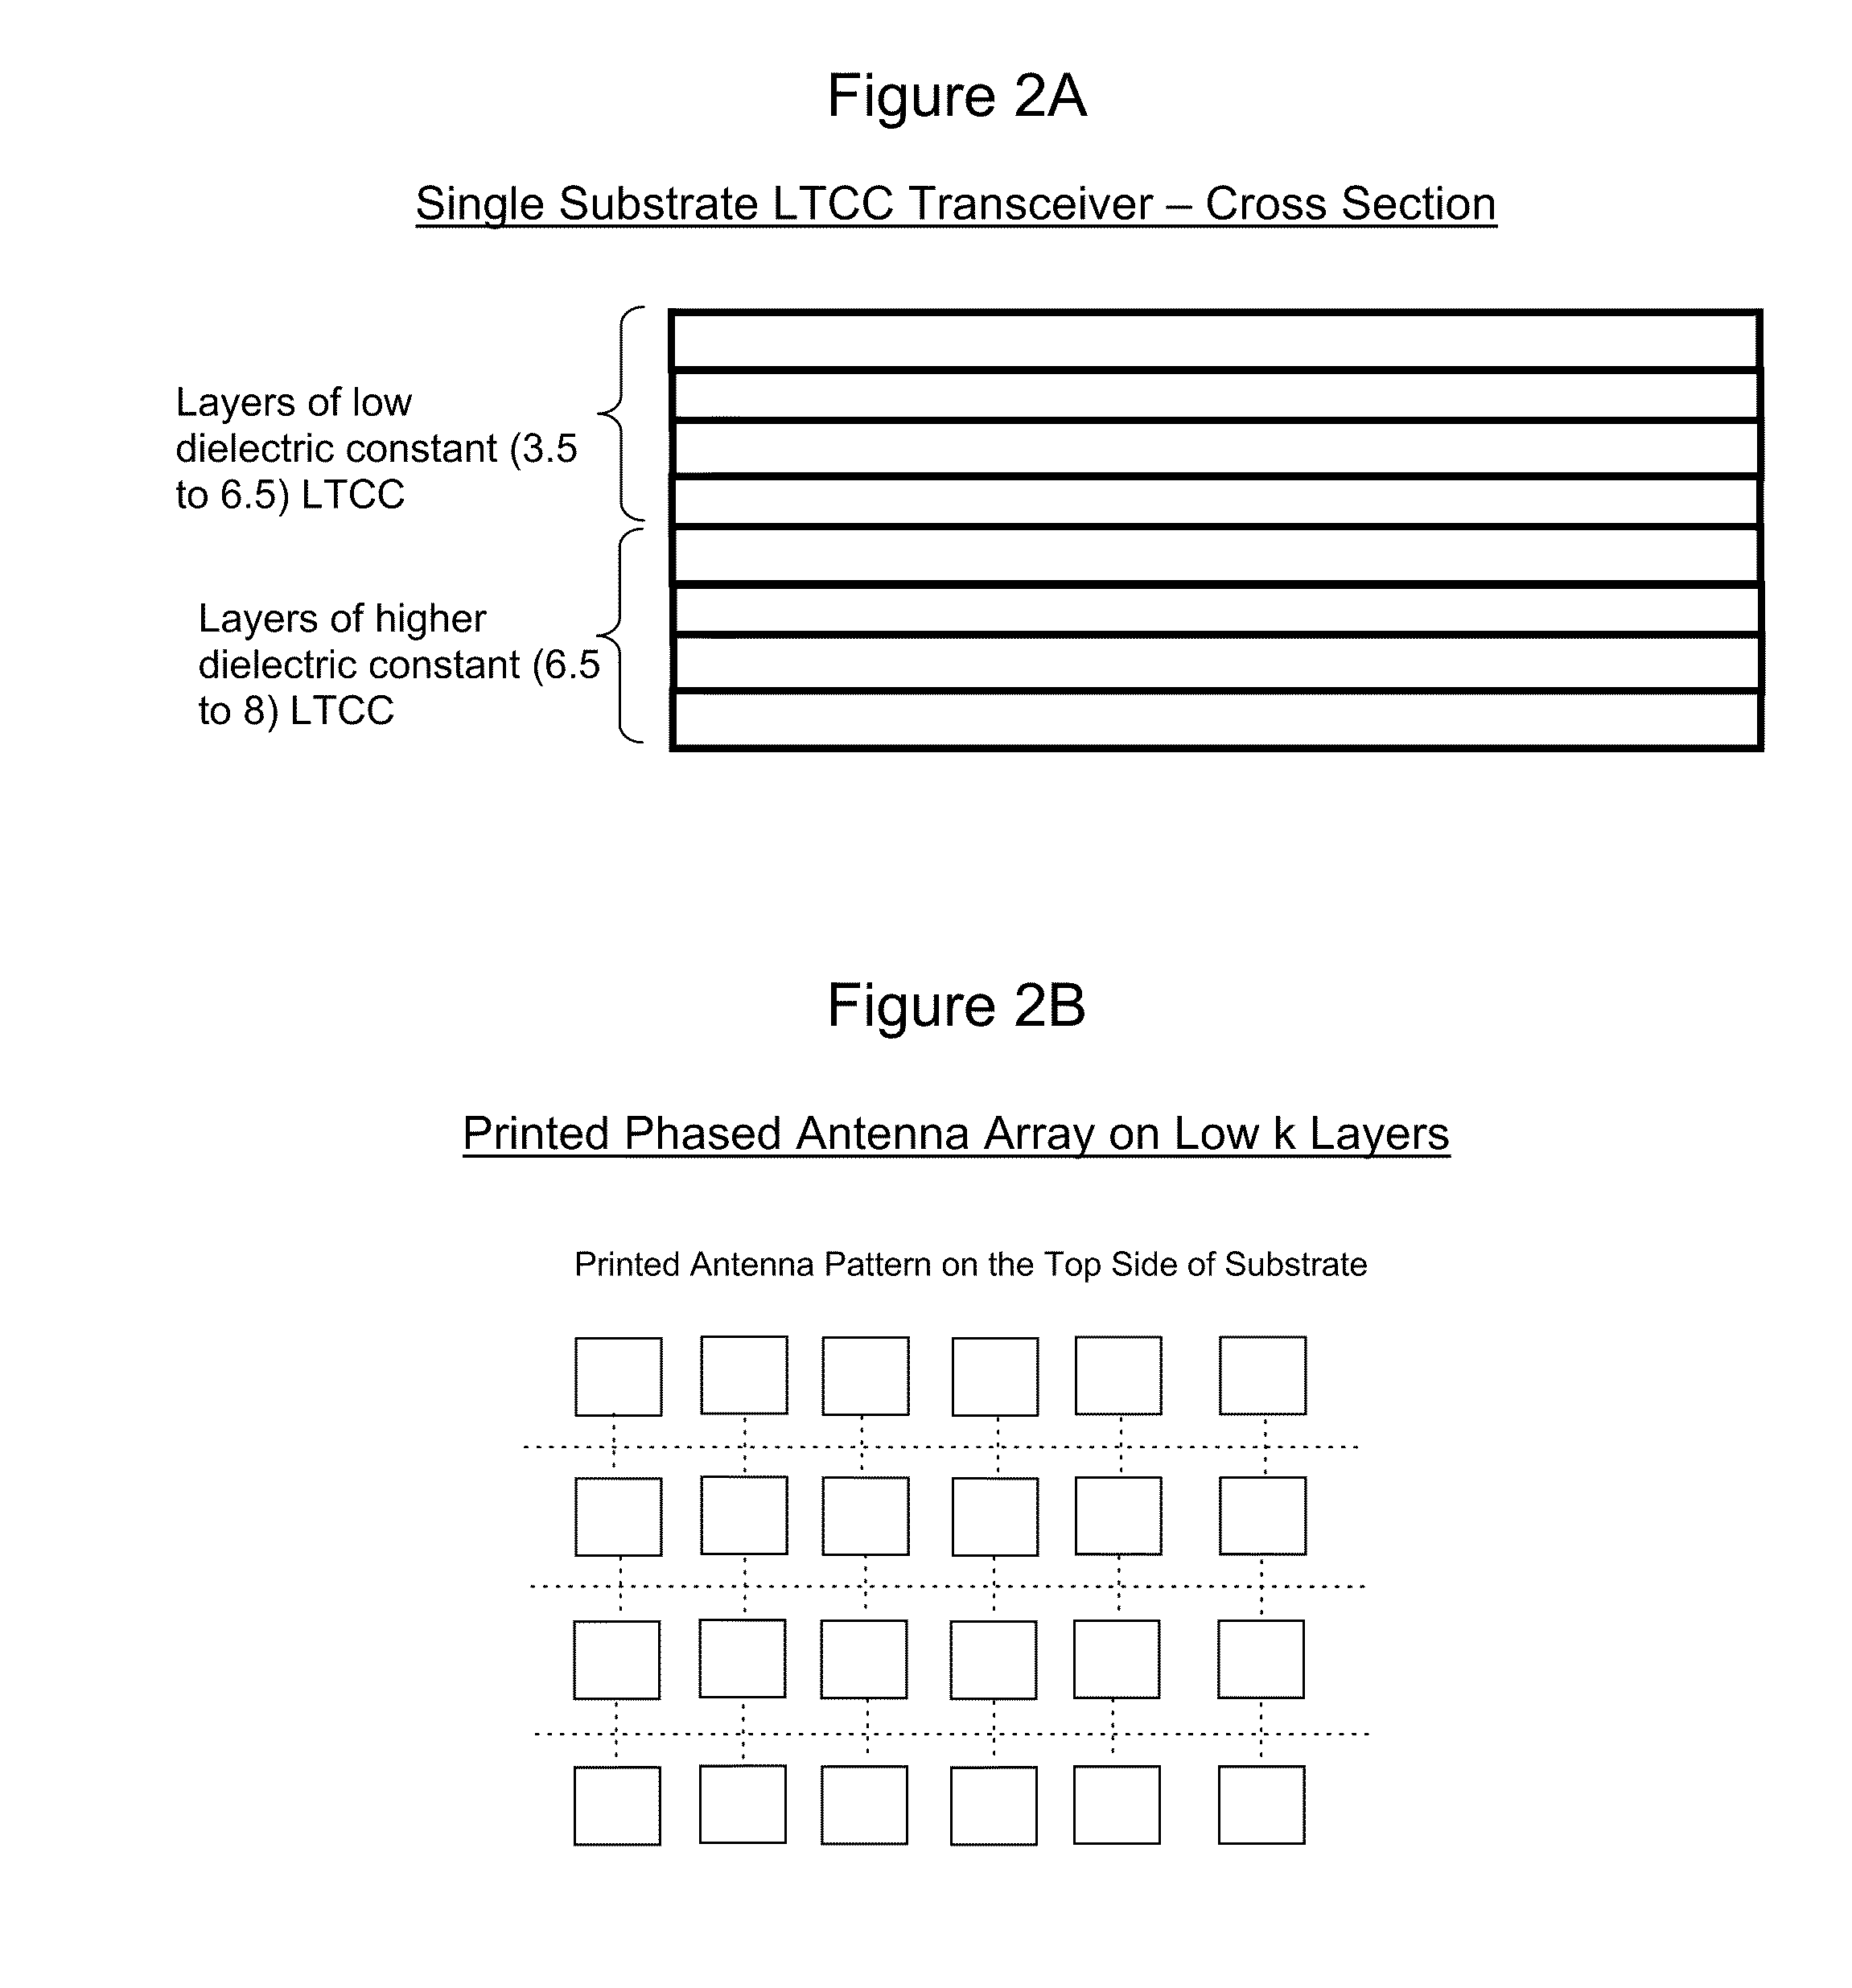 Method of manufacturing high frequency receiving and/or transmitting devices from low temperature co-fired ceramic materials and devices made therefrom